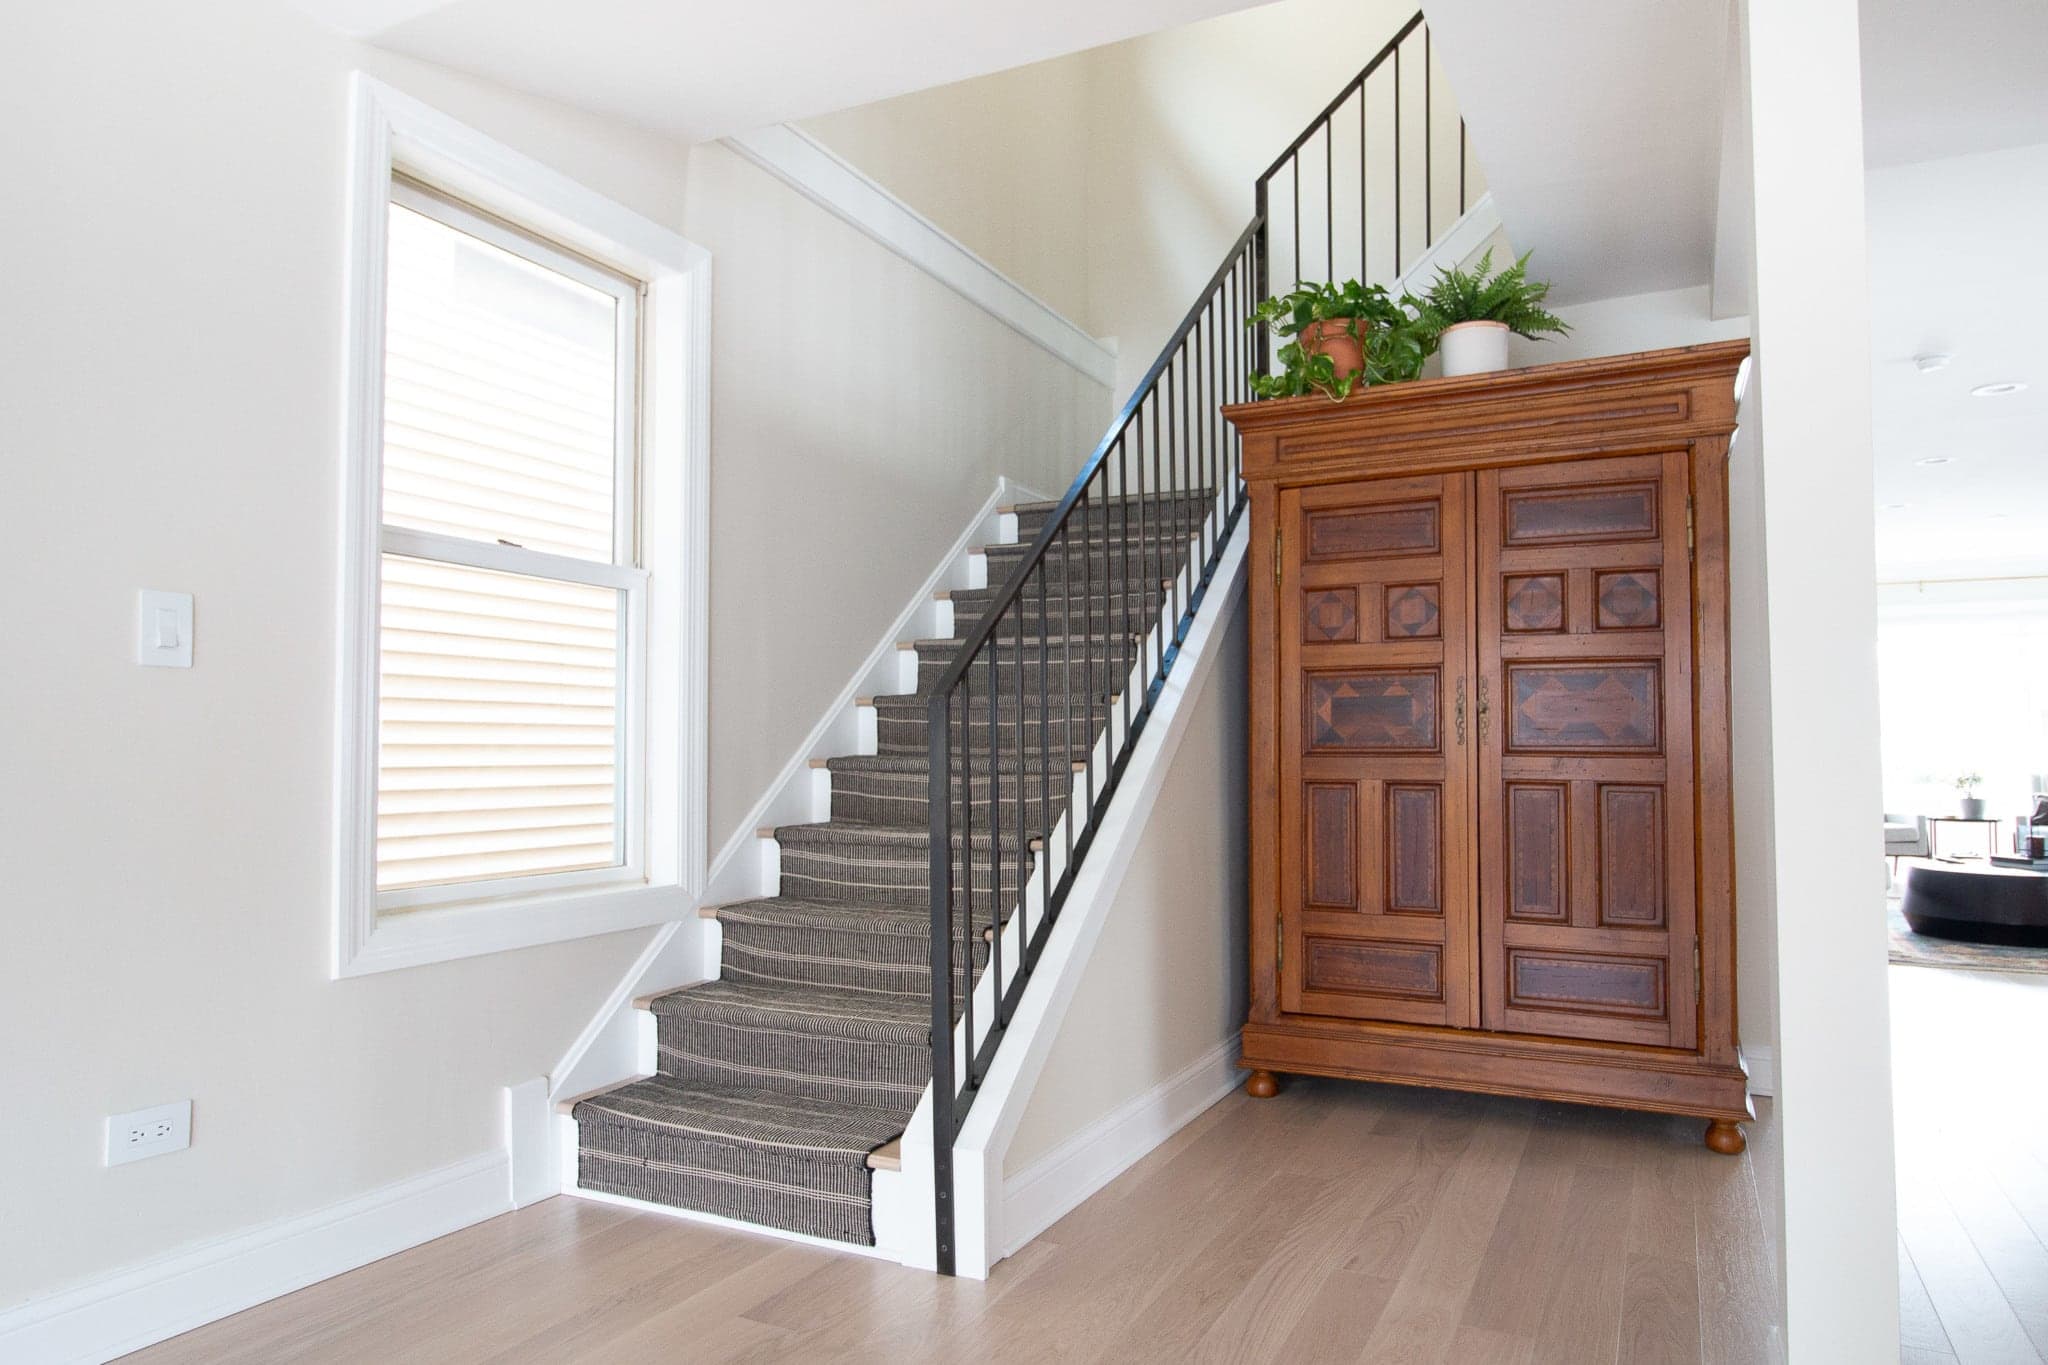 Tips to install a stair runner